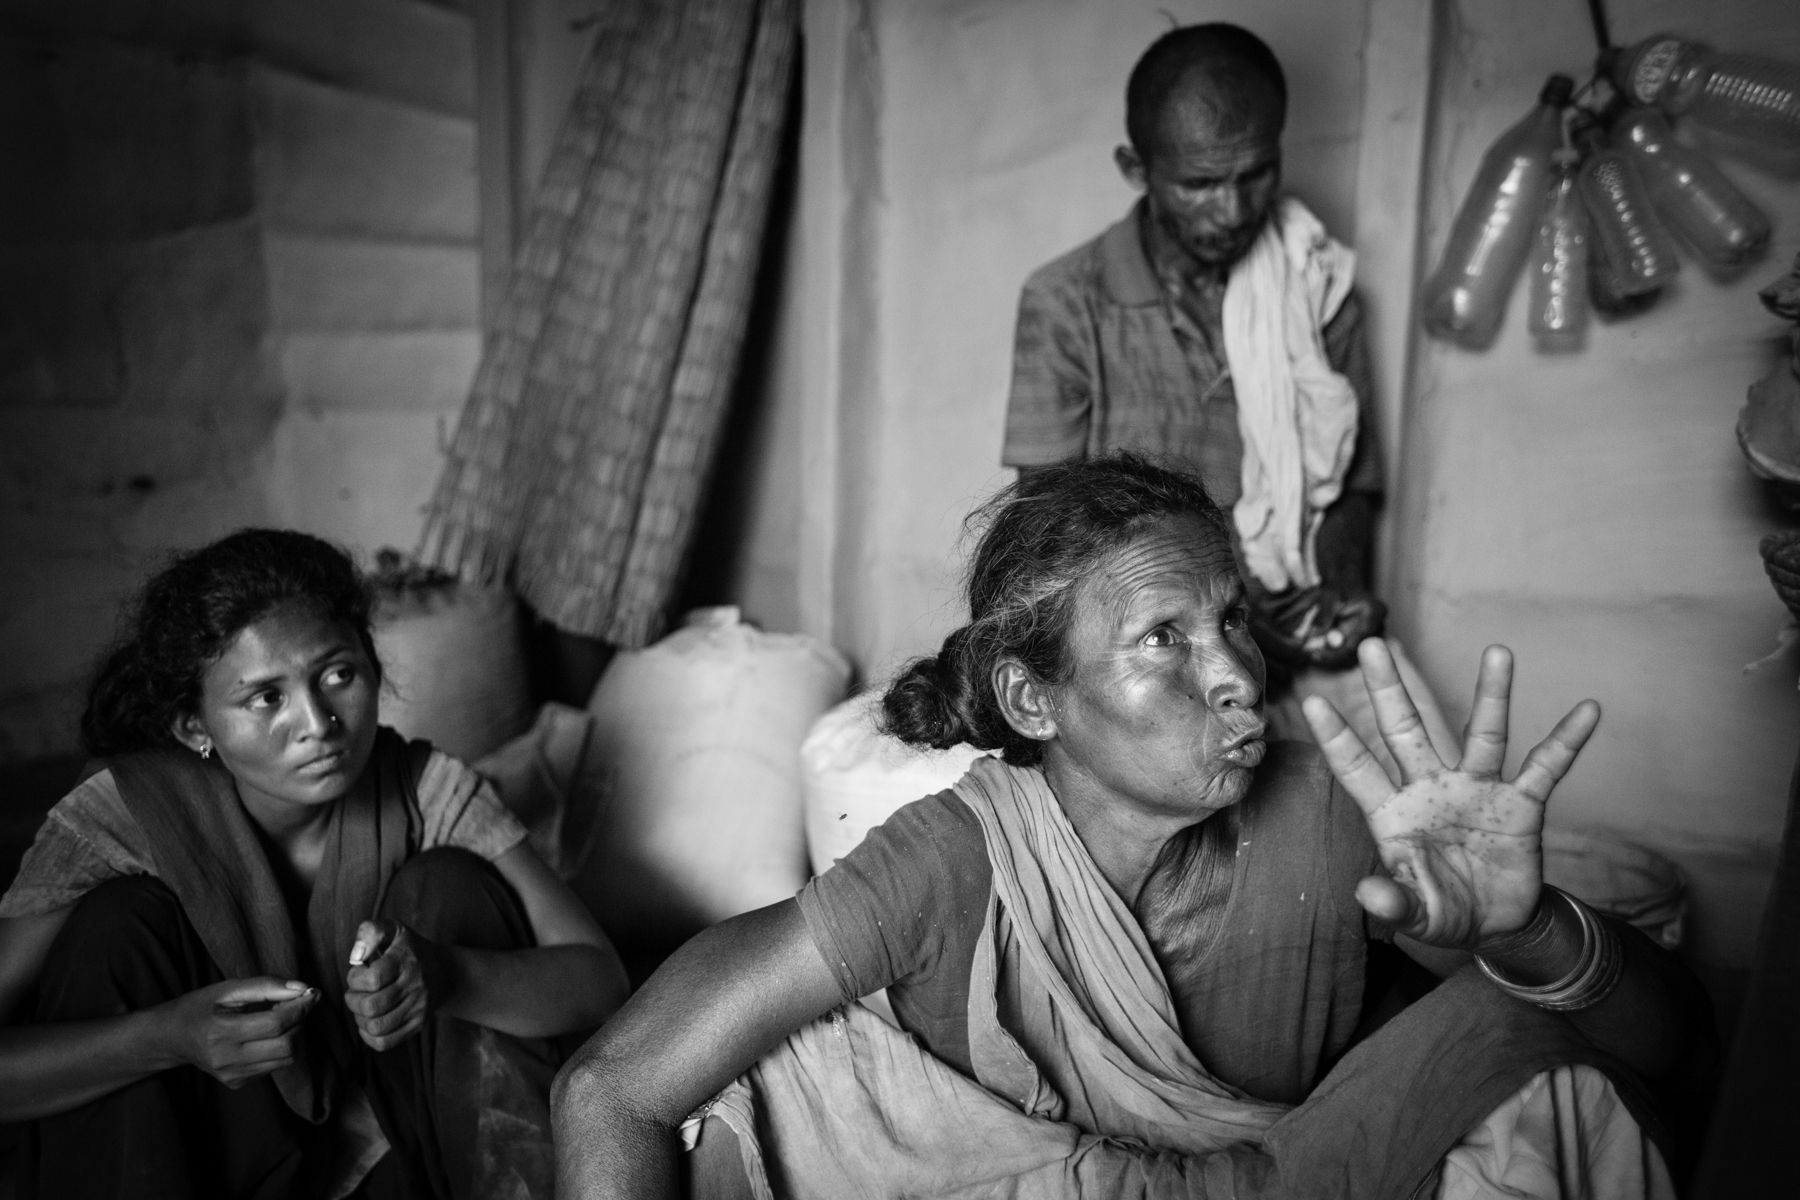 Rajpati Devi Chaudhary, 55, was also accused of being a witch on the day of Parvati Devi Chaudhary's murder. Rajpati recounts the events and how she fears for her life. 24 August 2013, Supauli, Parsa, Nepal.